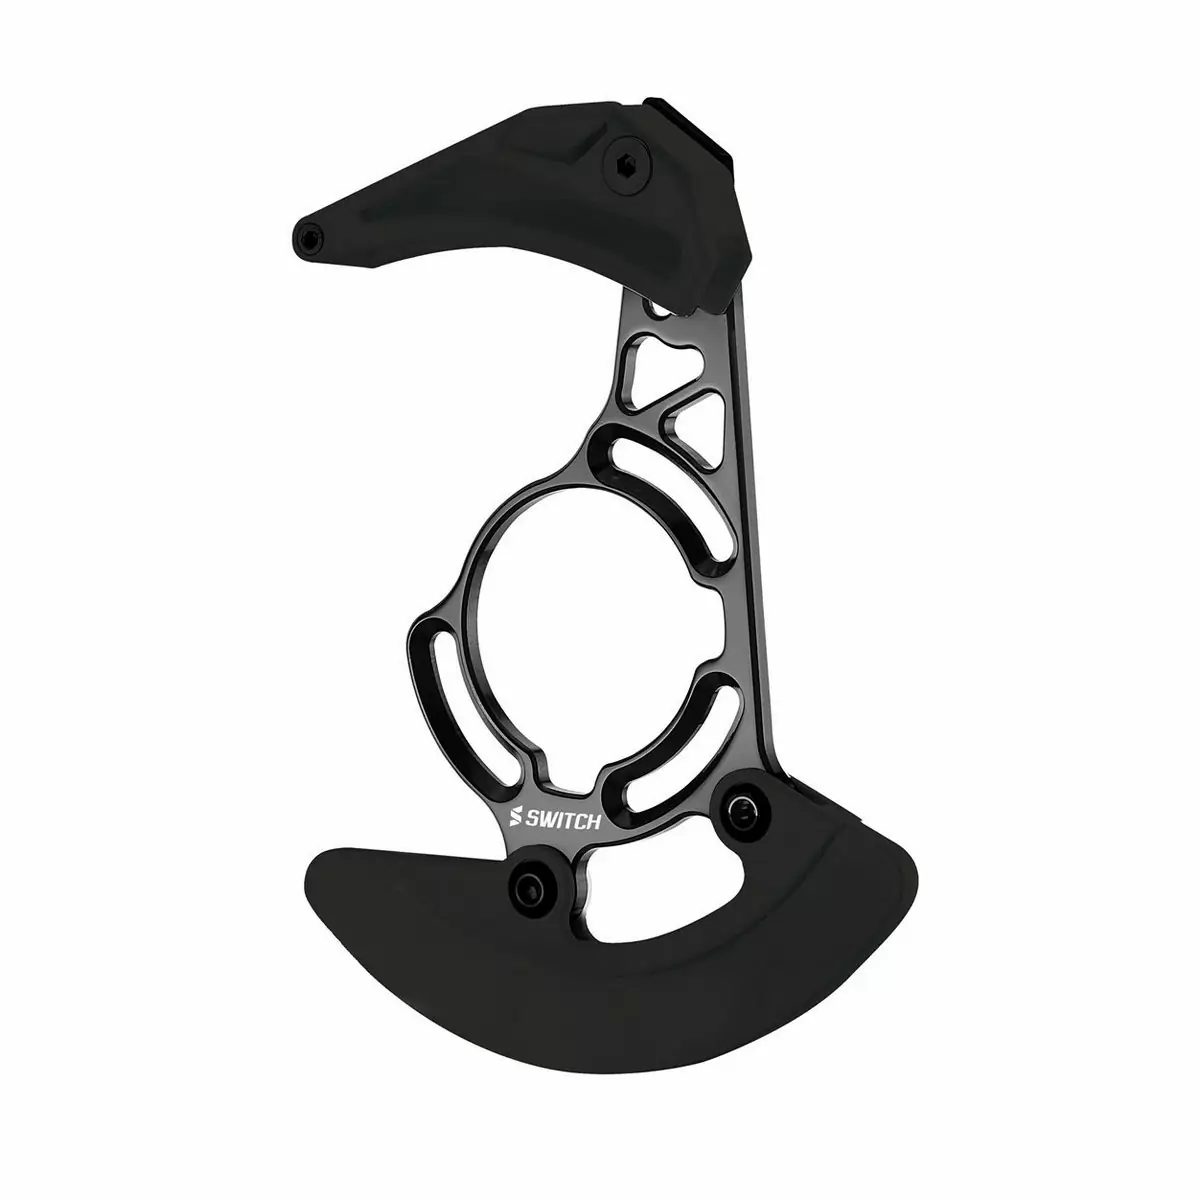 Enduro chain guide for 32 to 38t black crowns - image